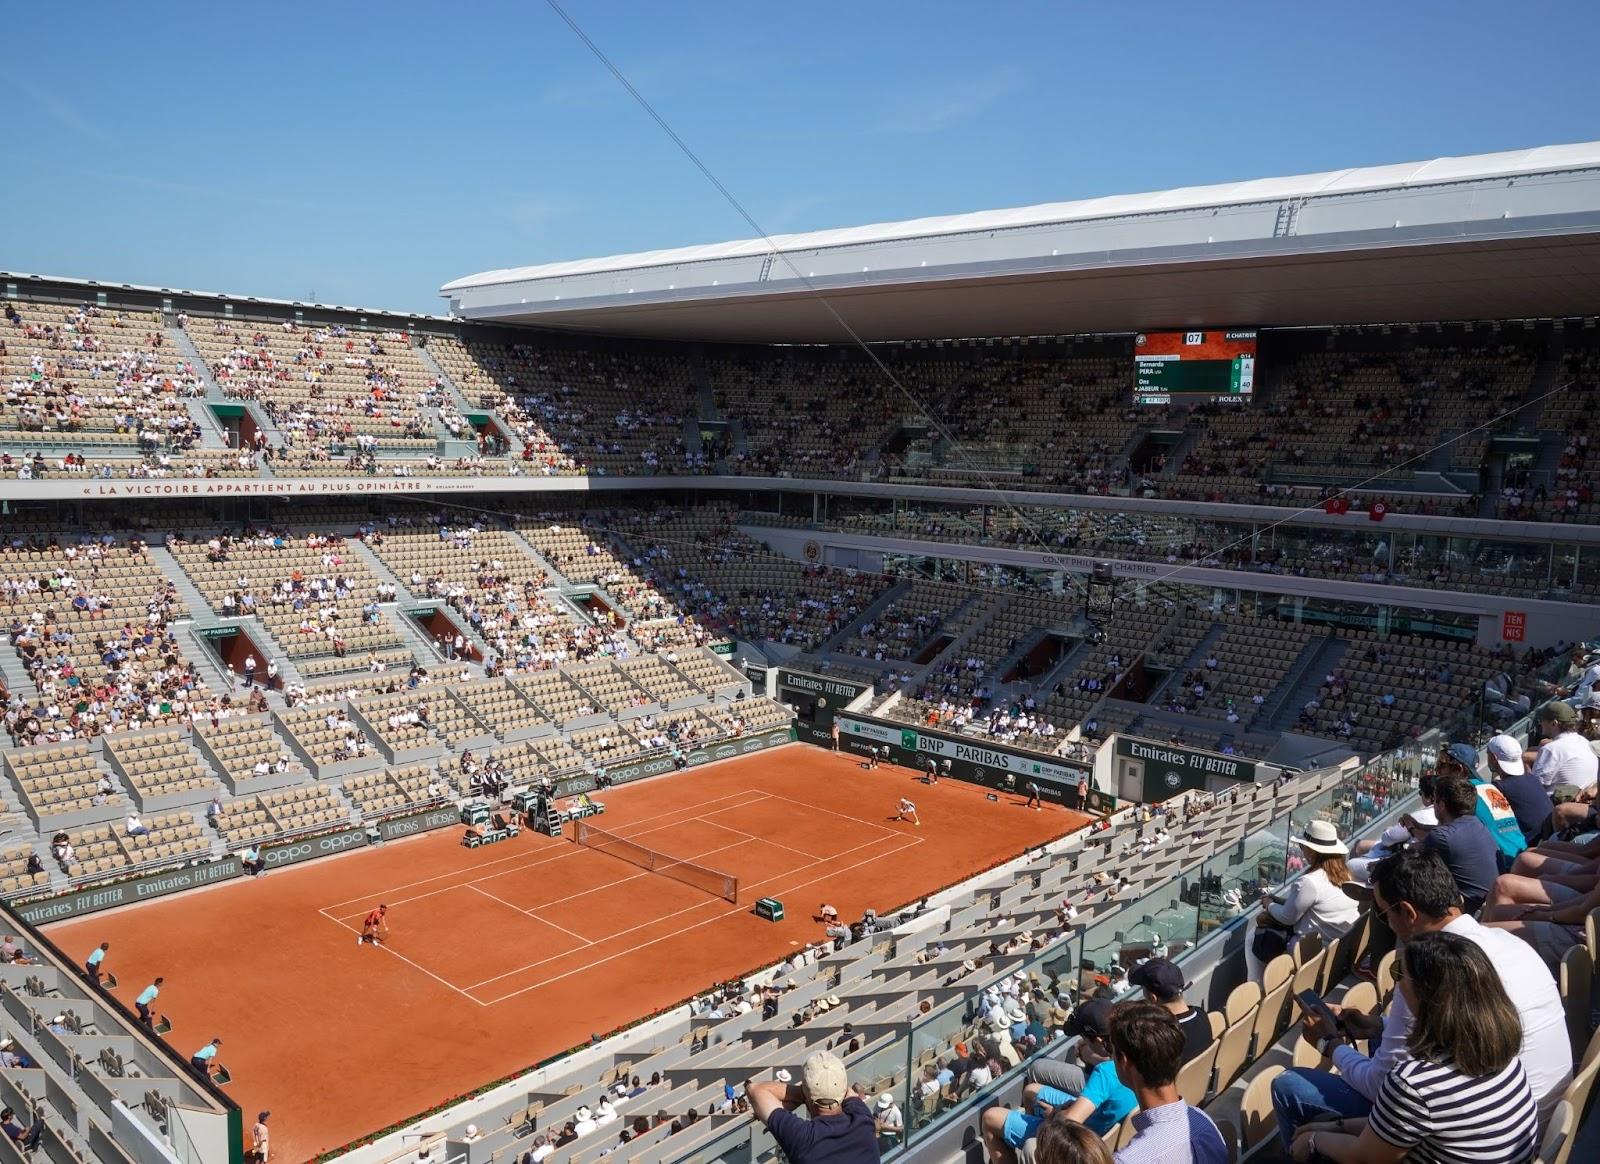 Court Philippe Chatrier at Le Stade Roland Garros 